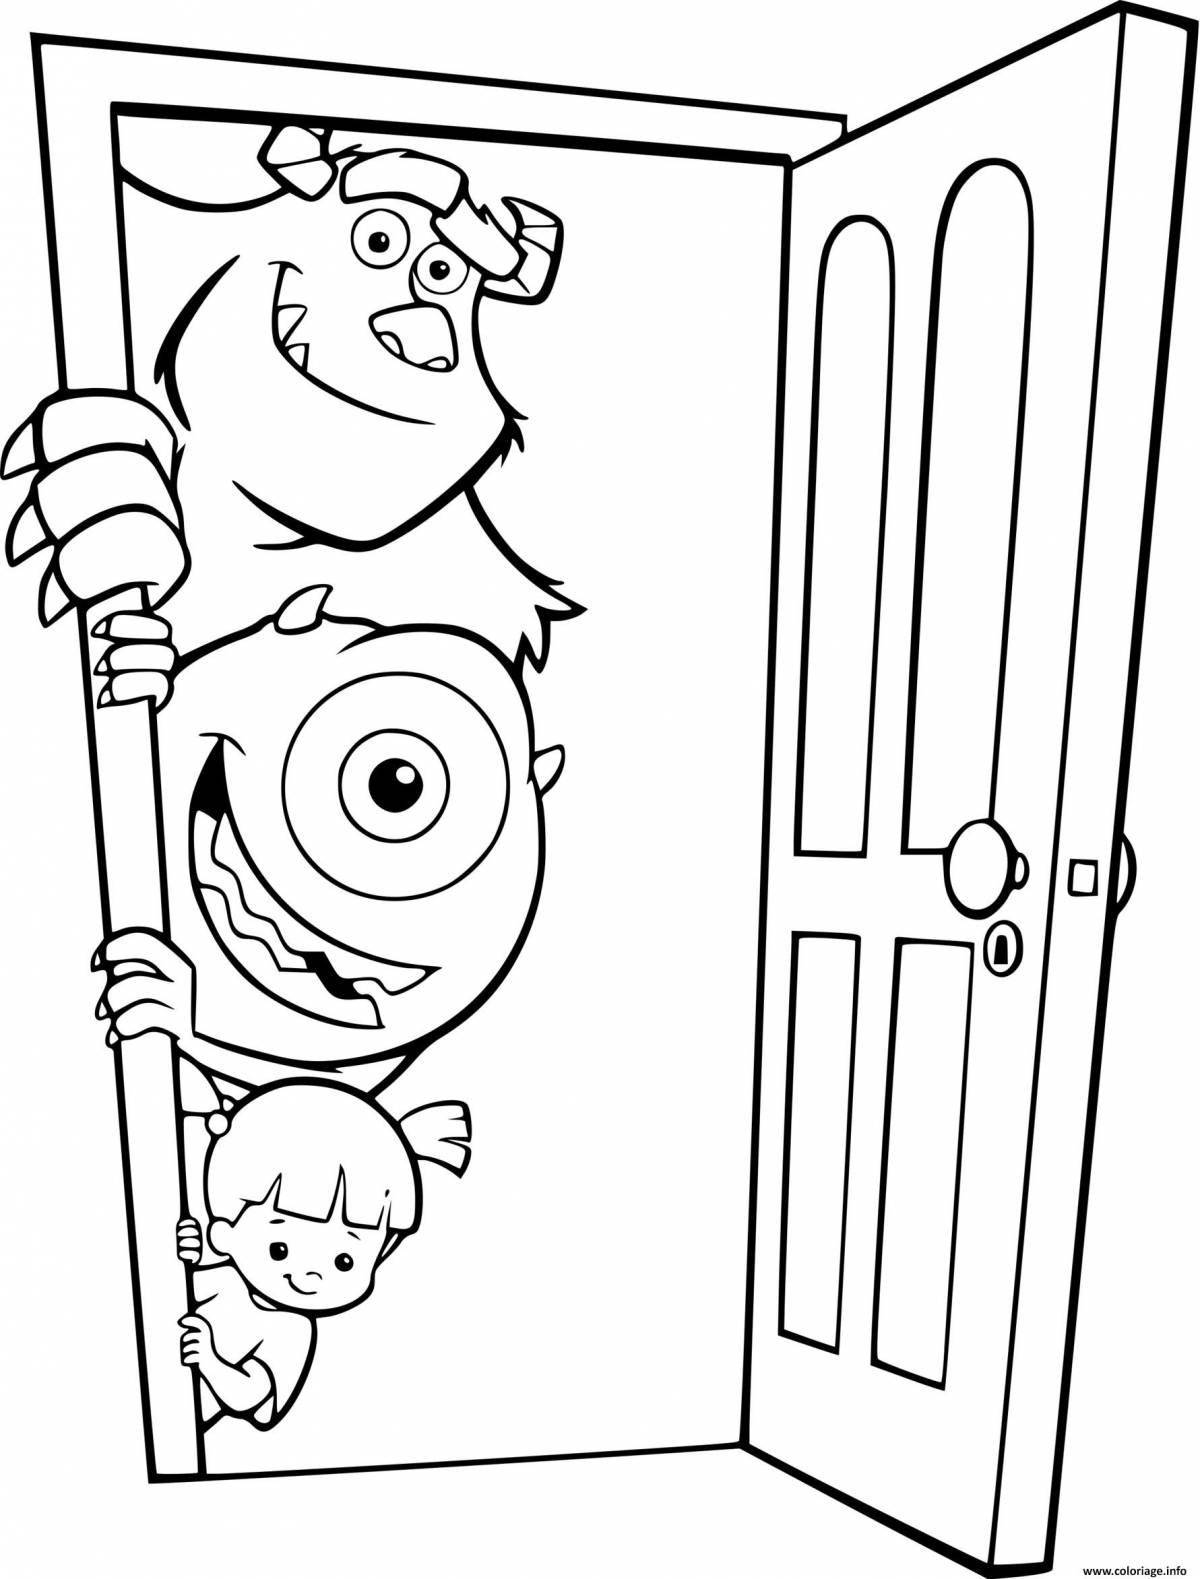 Coloring page festive knock on the door